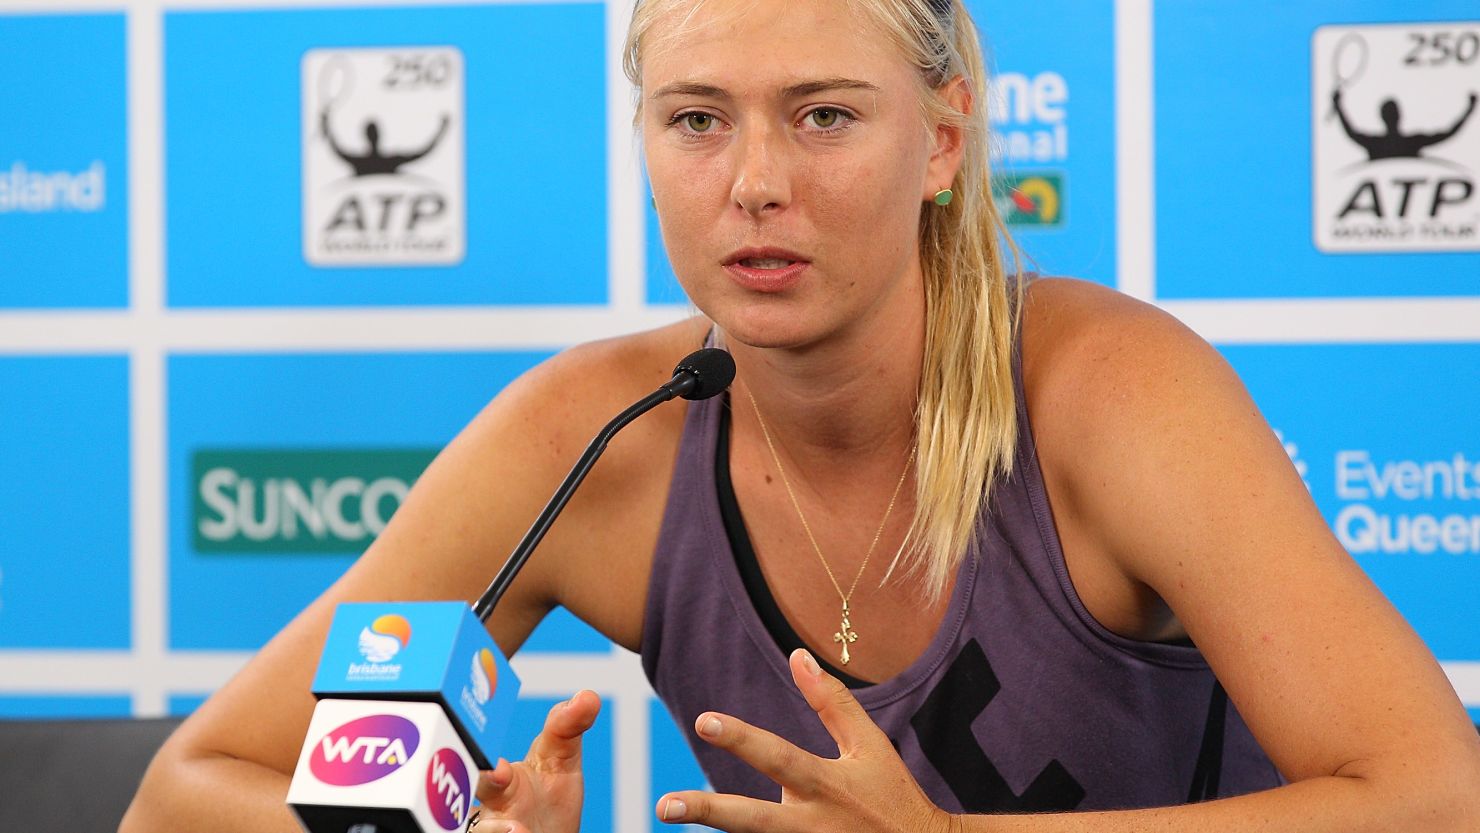 Maria Sharapova explains to the media the reasons for her pull out from the Brisbane International tournament.